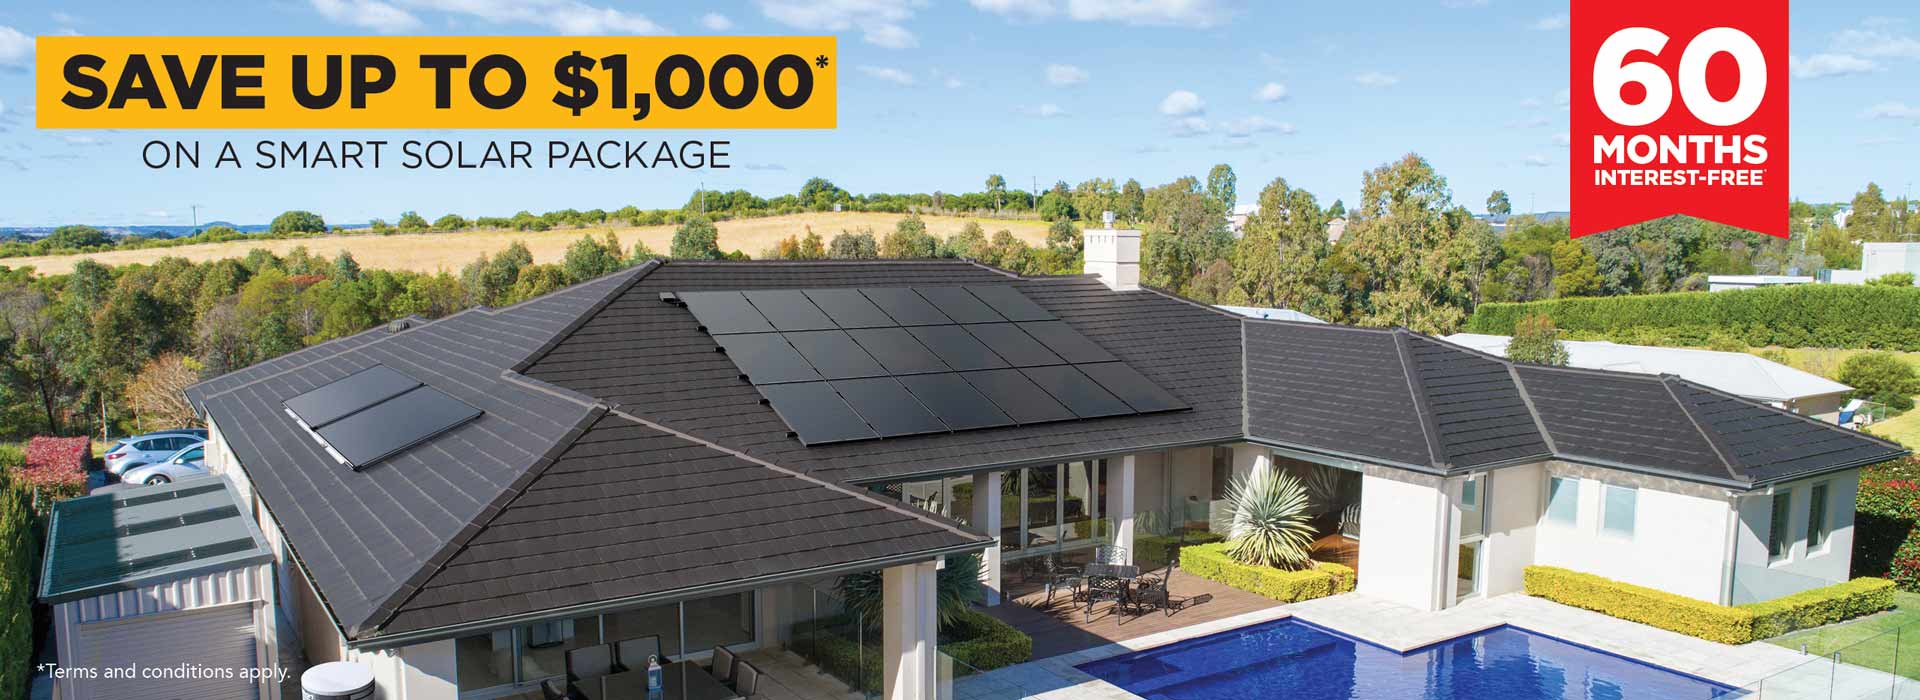 Save $1000 with a solar bundle from Solahart including solar power system and solar hot water heater